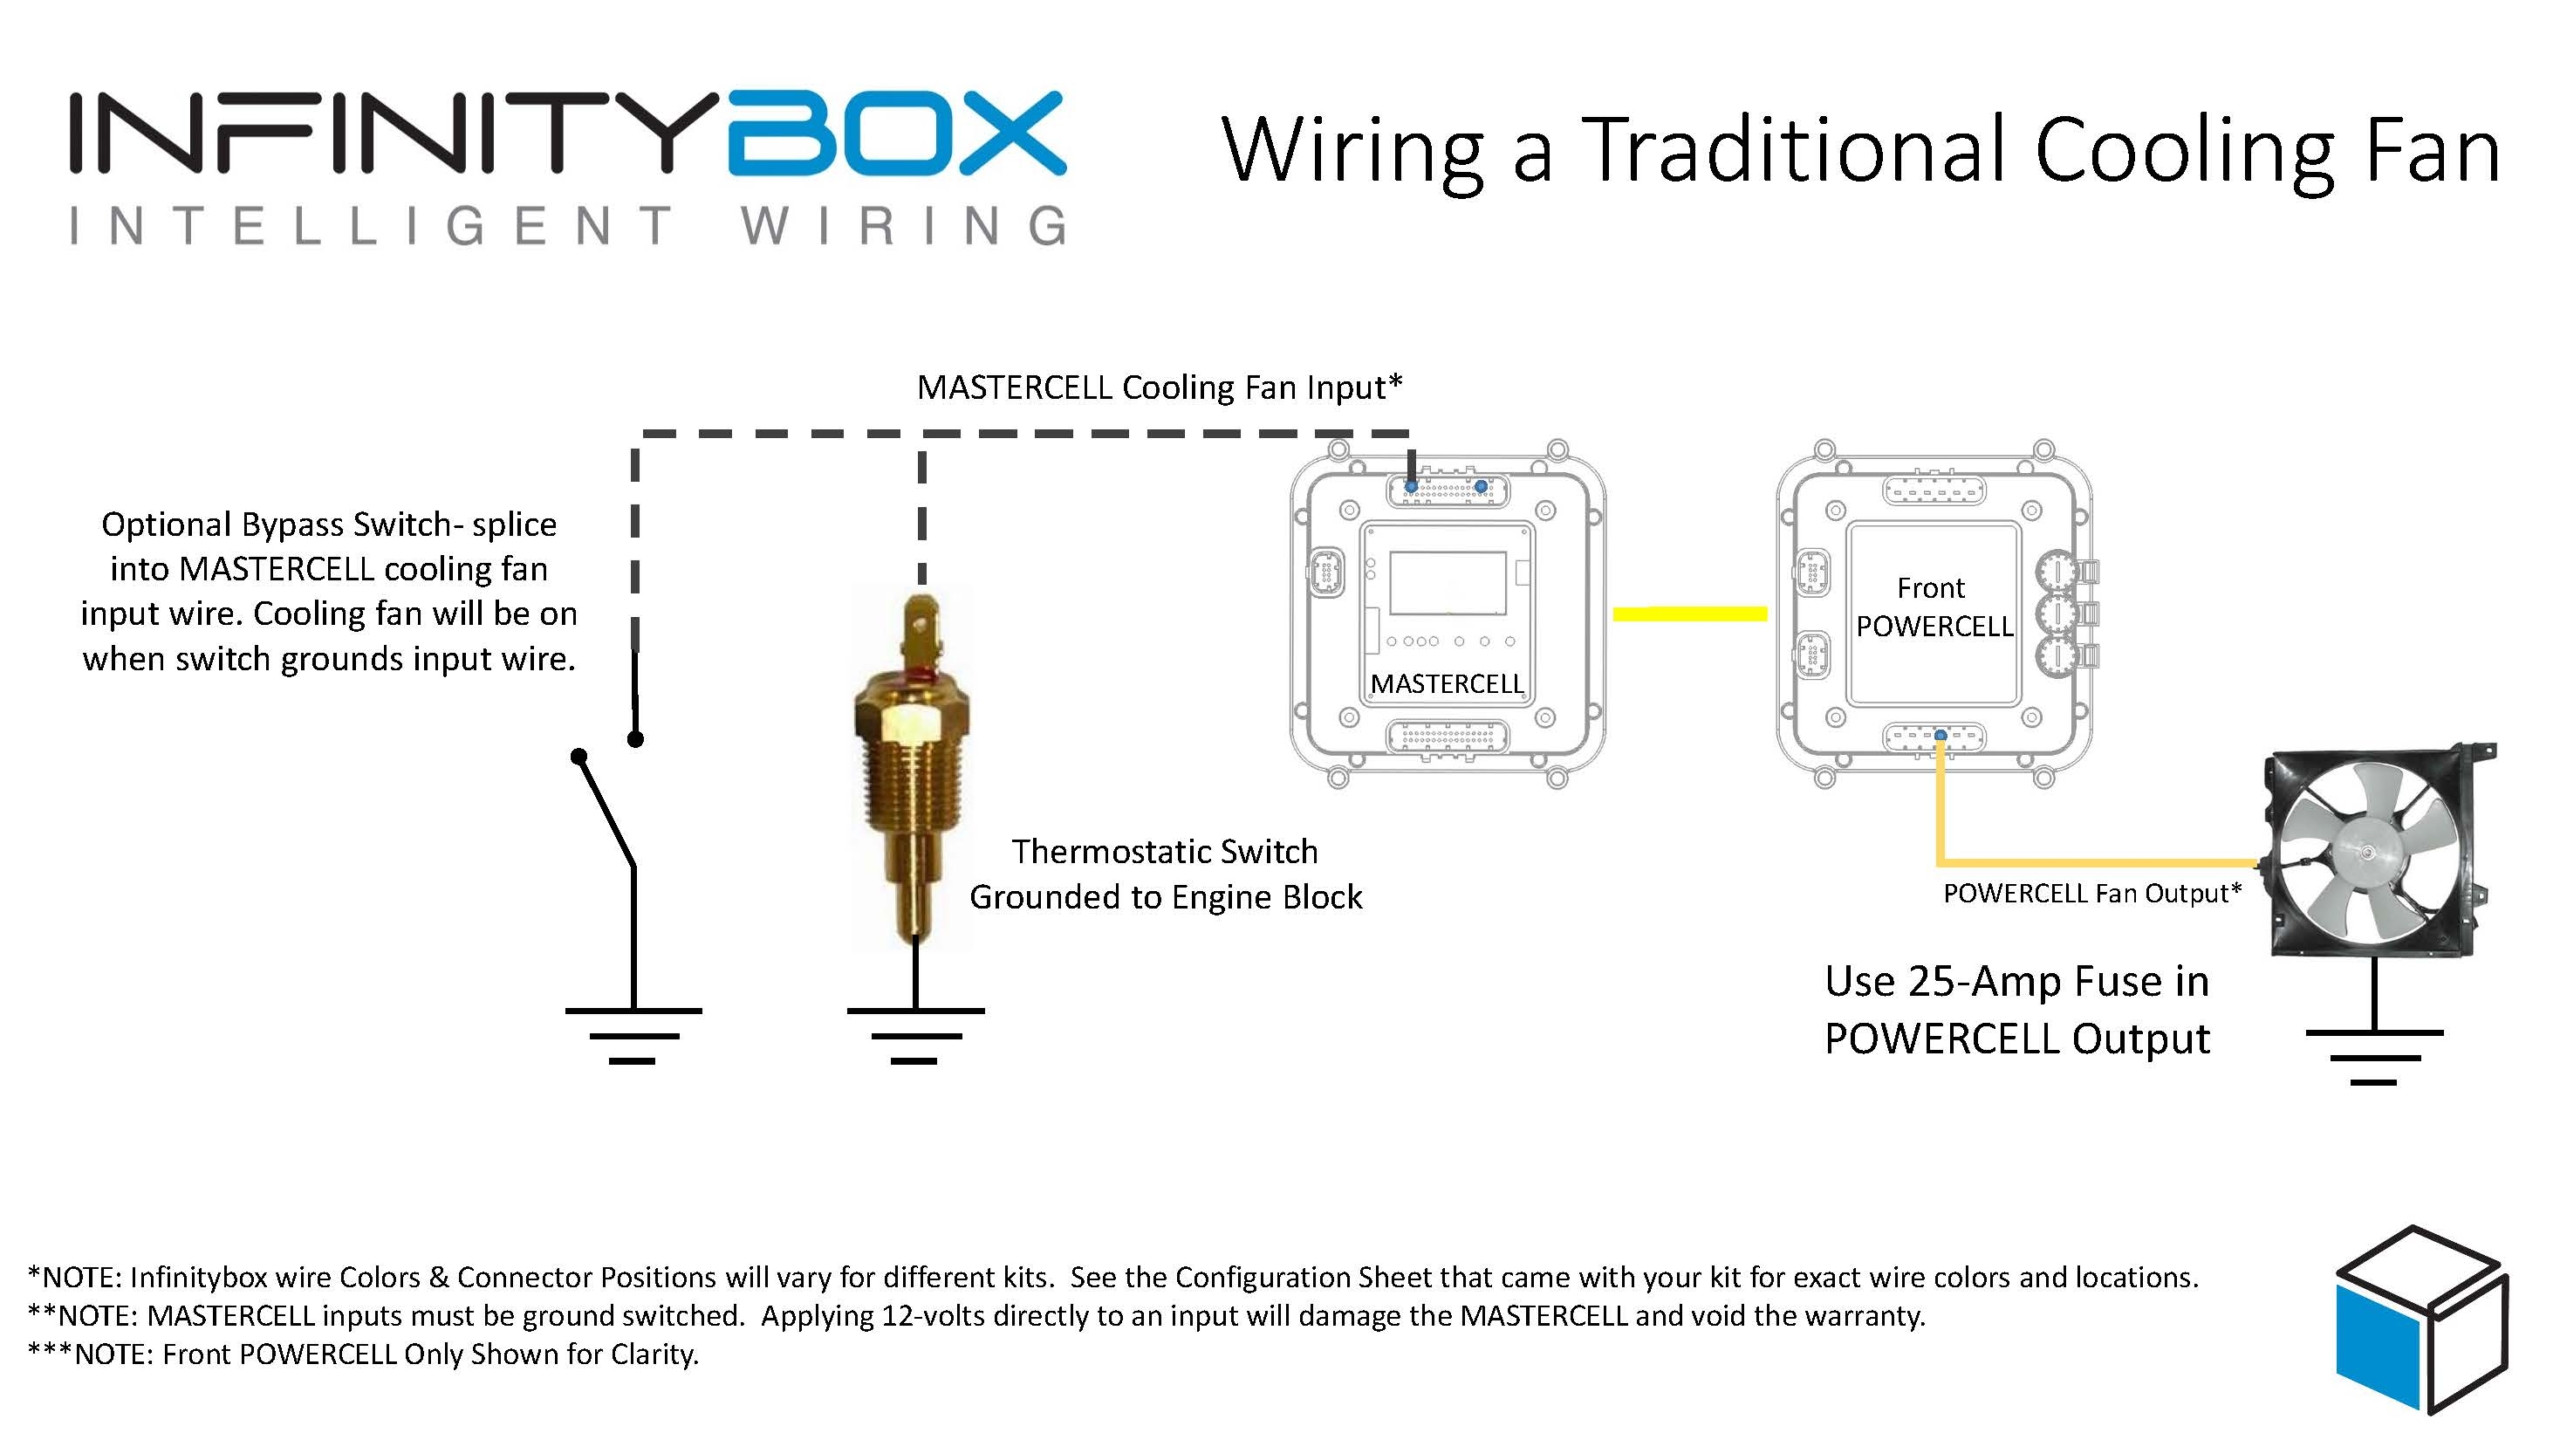 https://www.infinitybox.com/wp-content/uploads/2021/02/Wiring-Cooling-Fan-Image-scaled.jpg